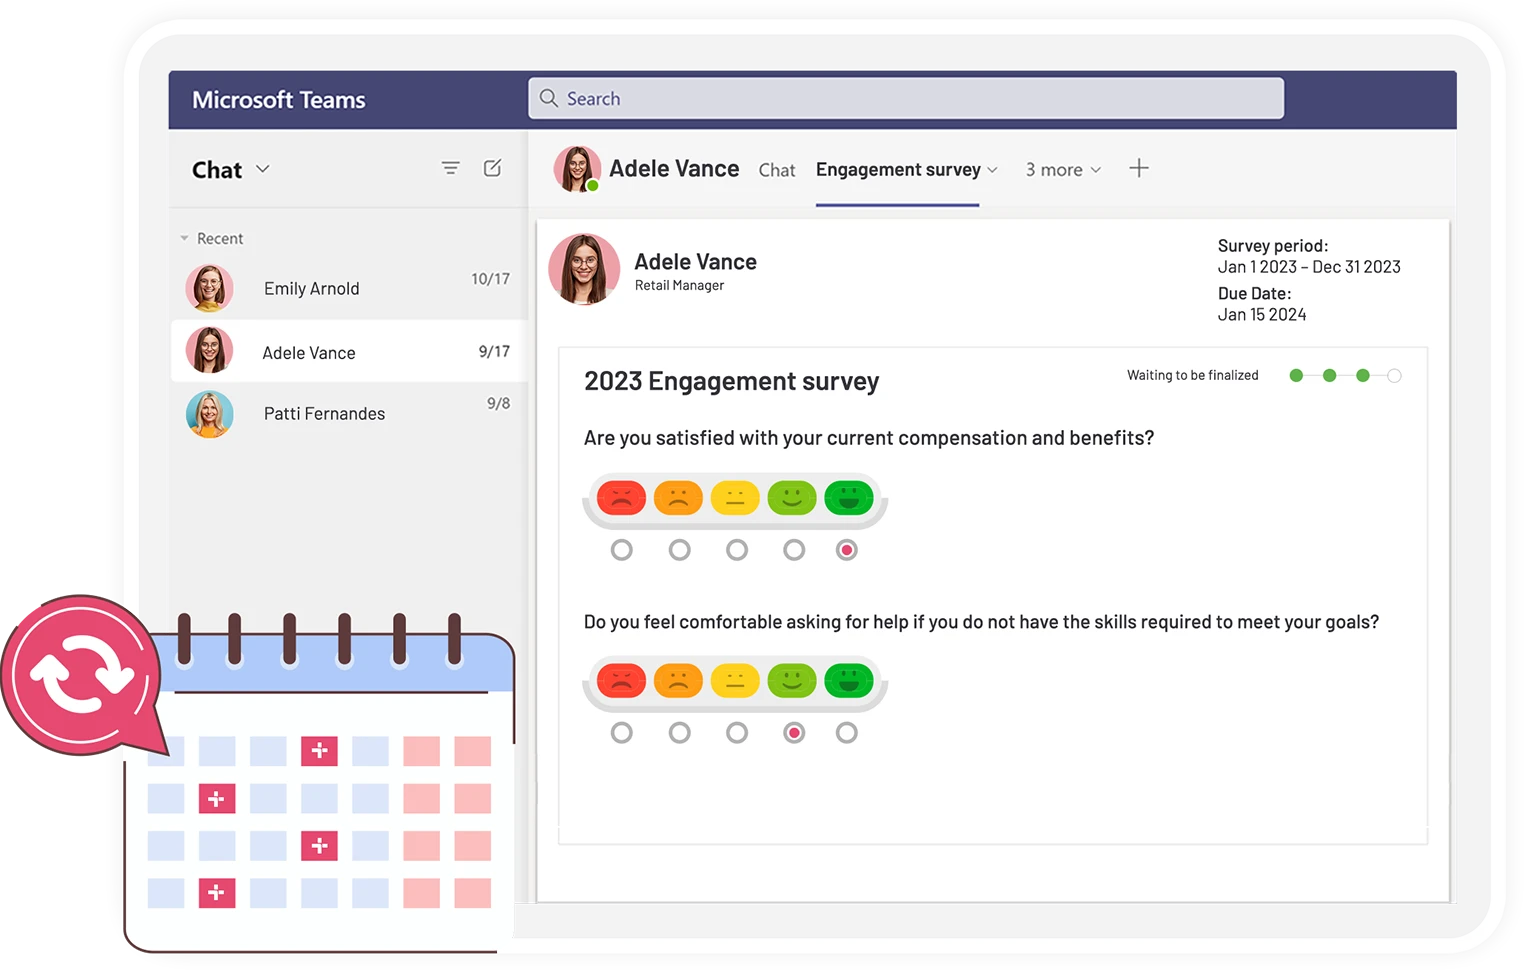 Digital transformation: Teamflect engagement survey in microsoft teams with a survey question and calendar icon